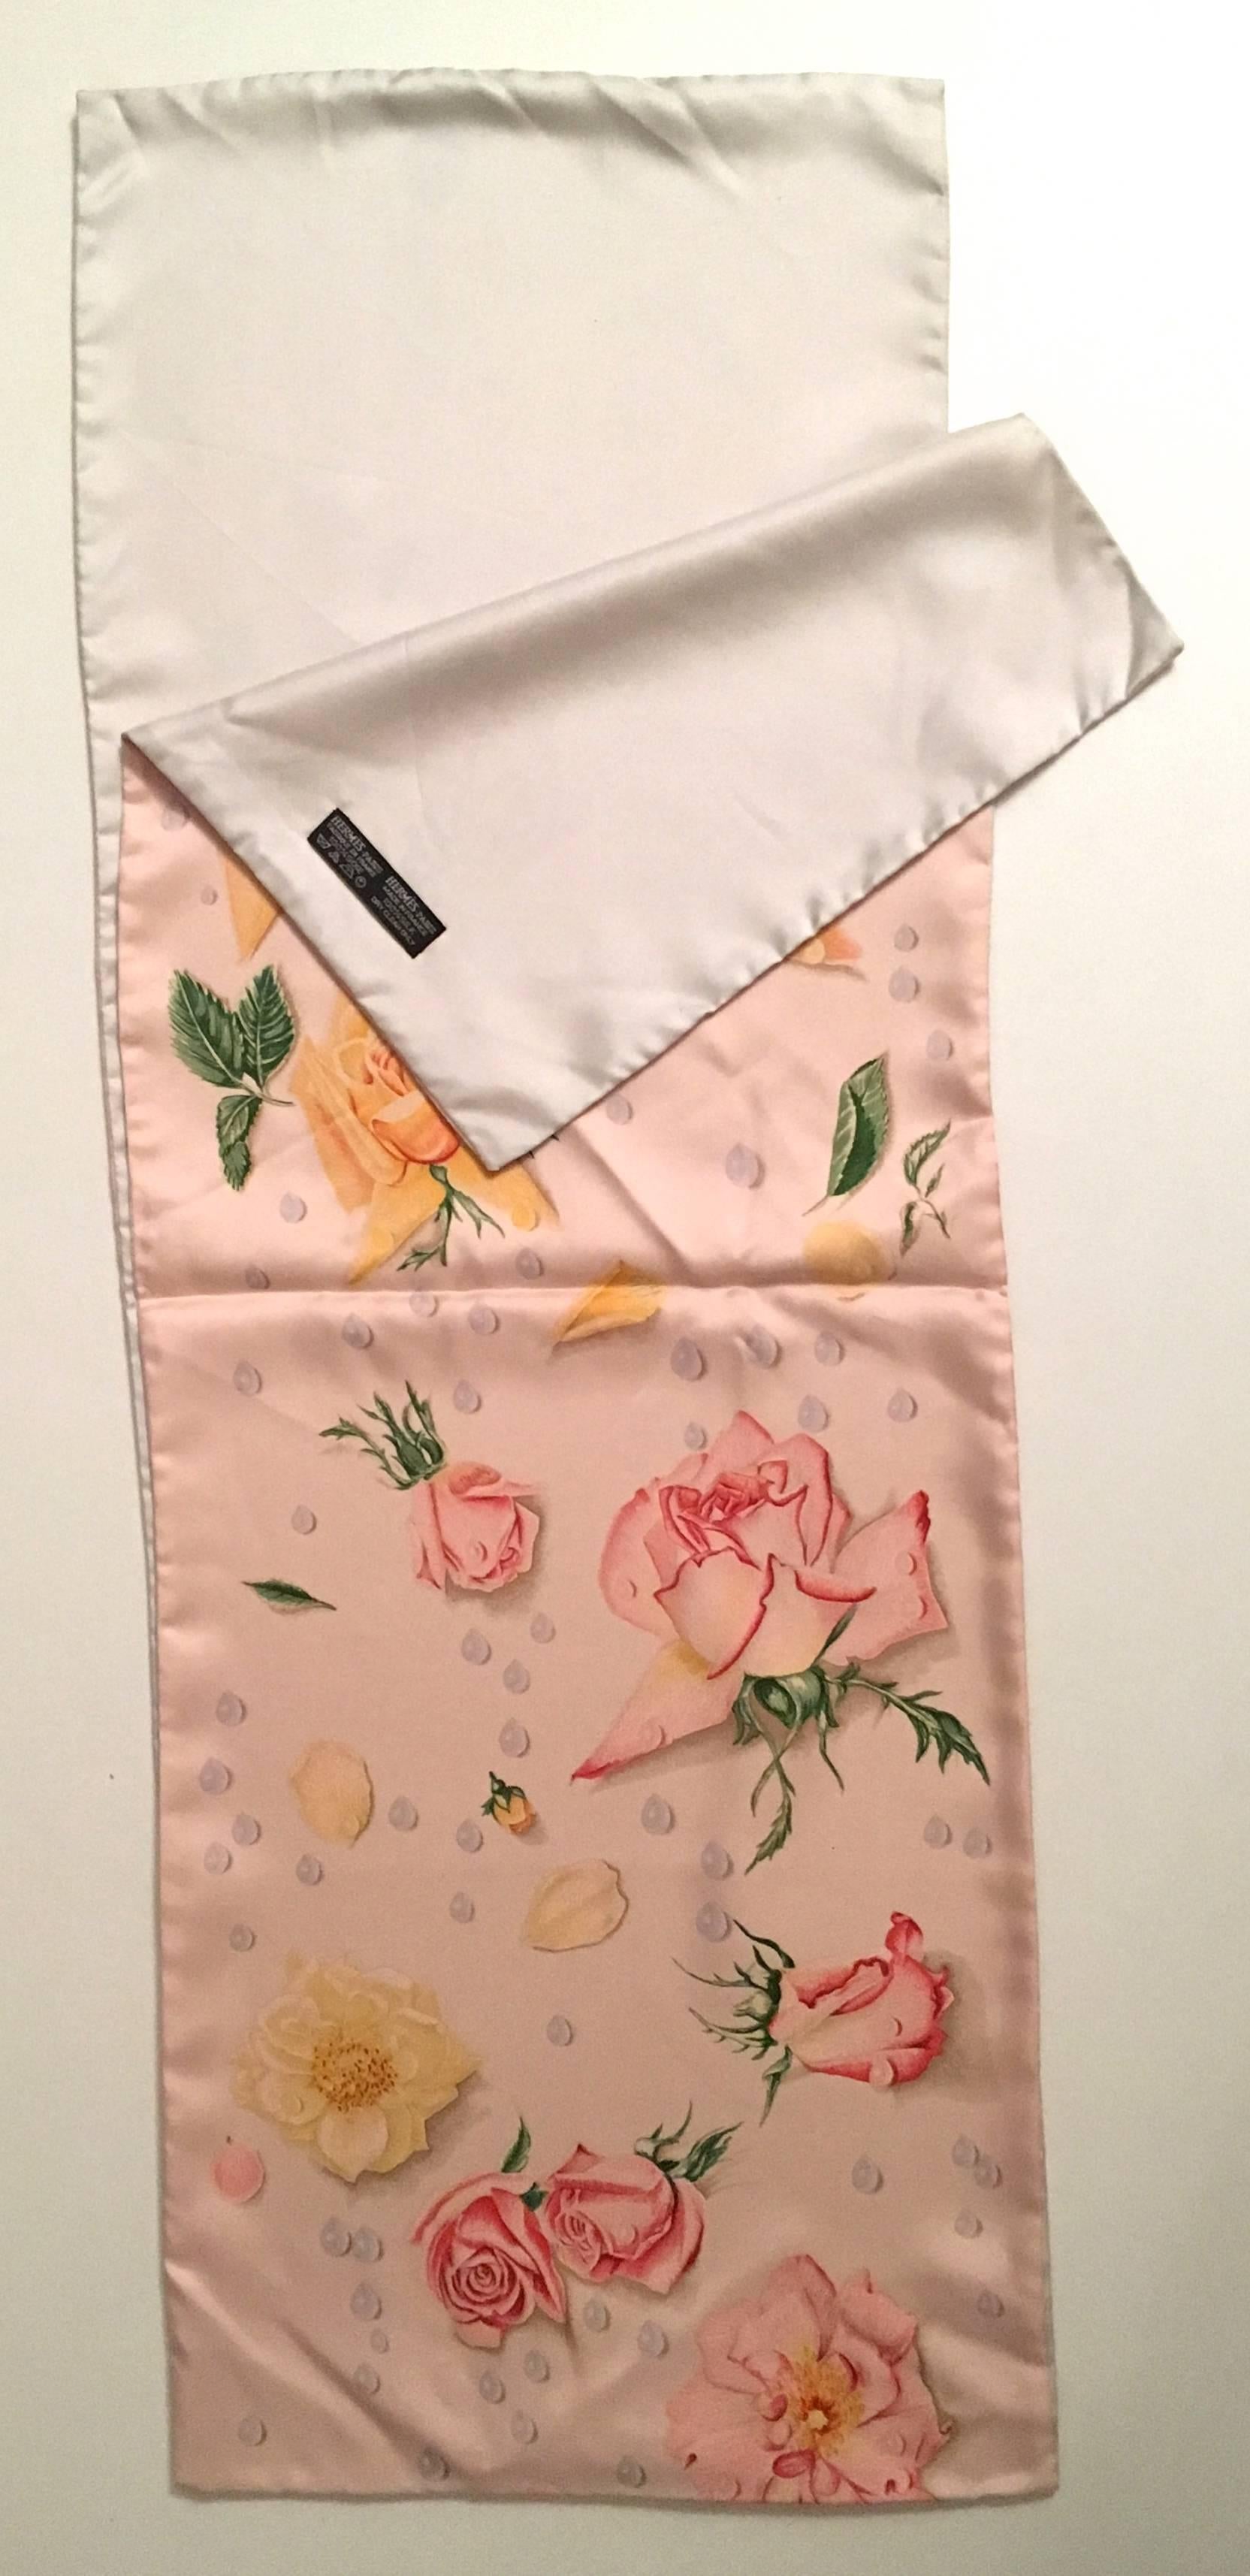 Presented here is a beautiful silk shawl from Hermes Paris. This beautiful shawl / scarf is comprised of two complete connected panels of silk fabric on either side. One side is a light pink floral print and the reverse side of the shawl is a solid